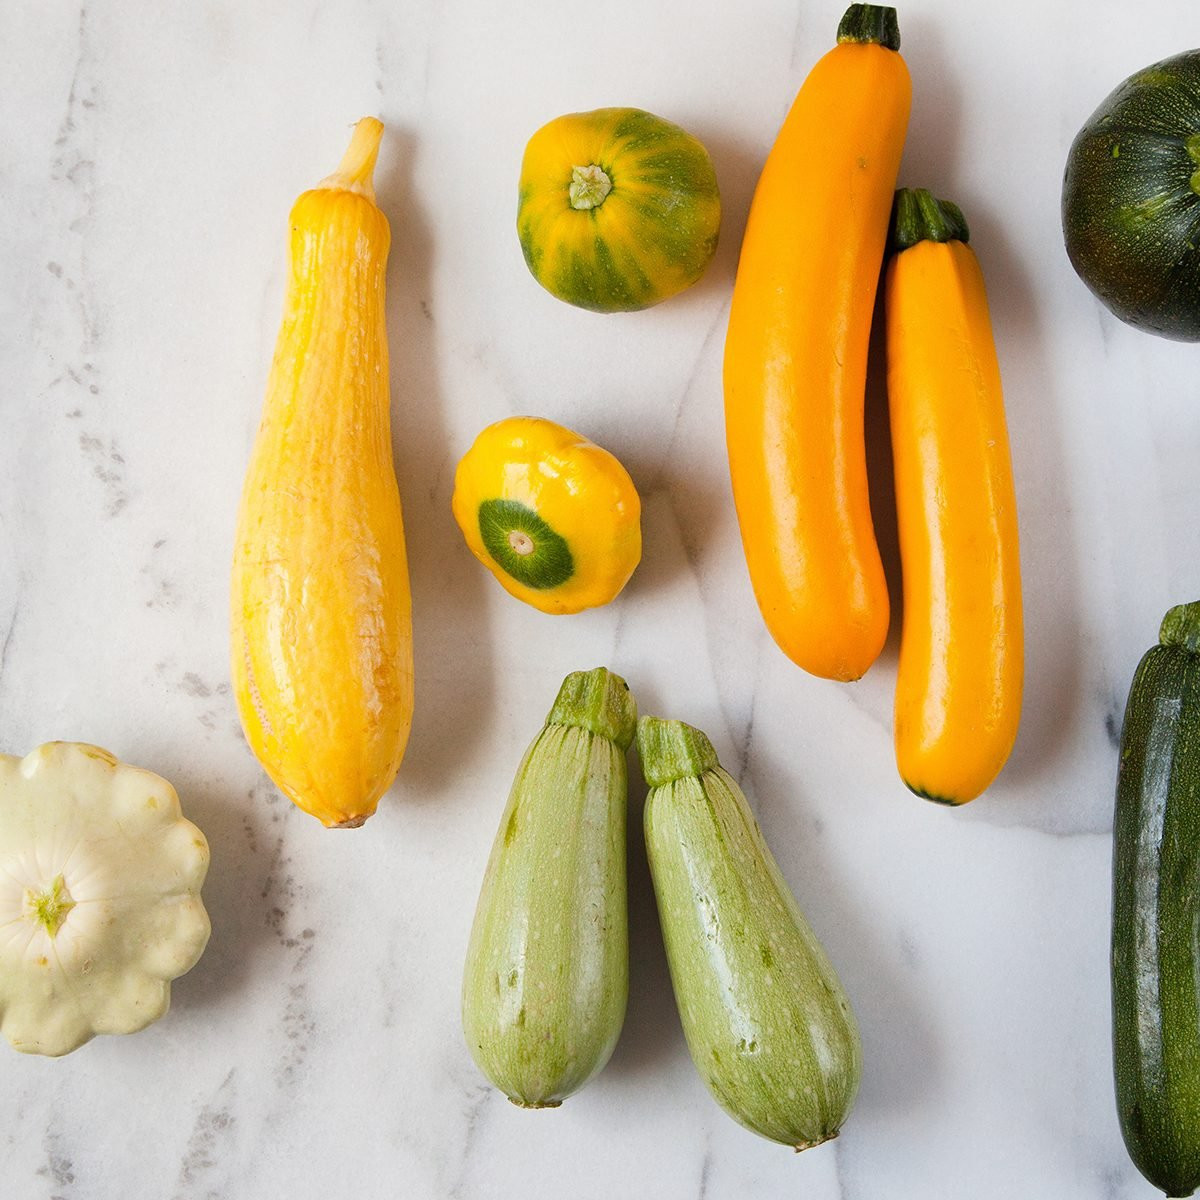 Types Of Summer Squash
 8 Types of Summer Squash and How to Cook Them